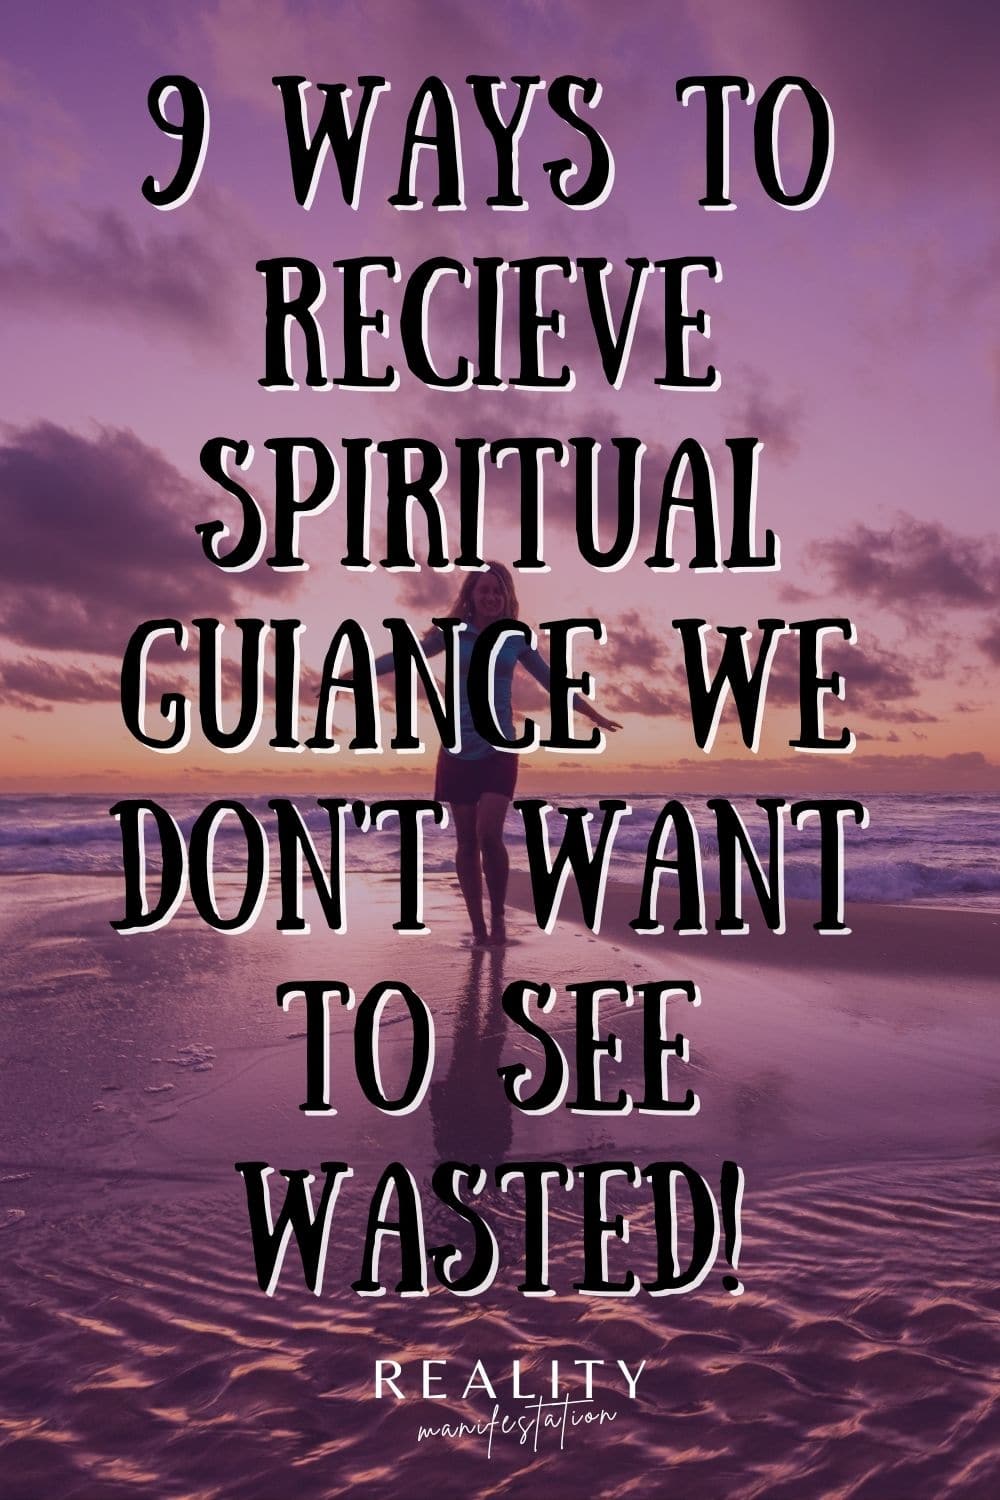 image saying 9 Ways To Receive Spiritual Guidance We Don't Want To See Wasted!